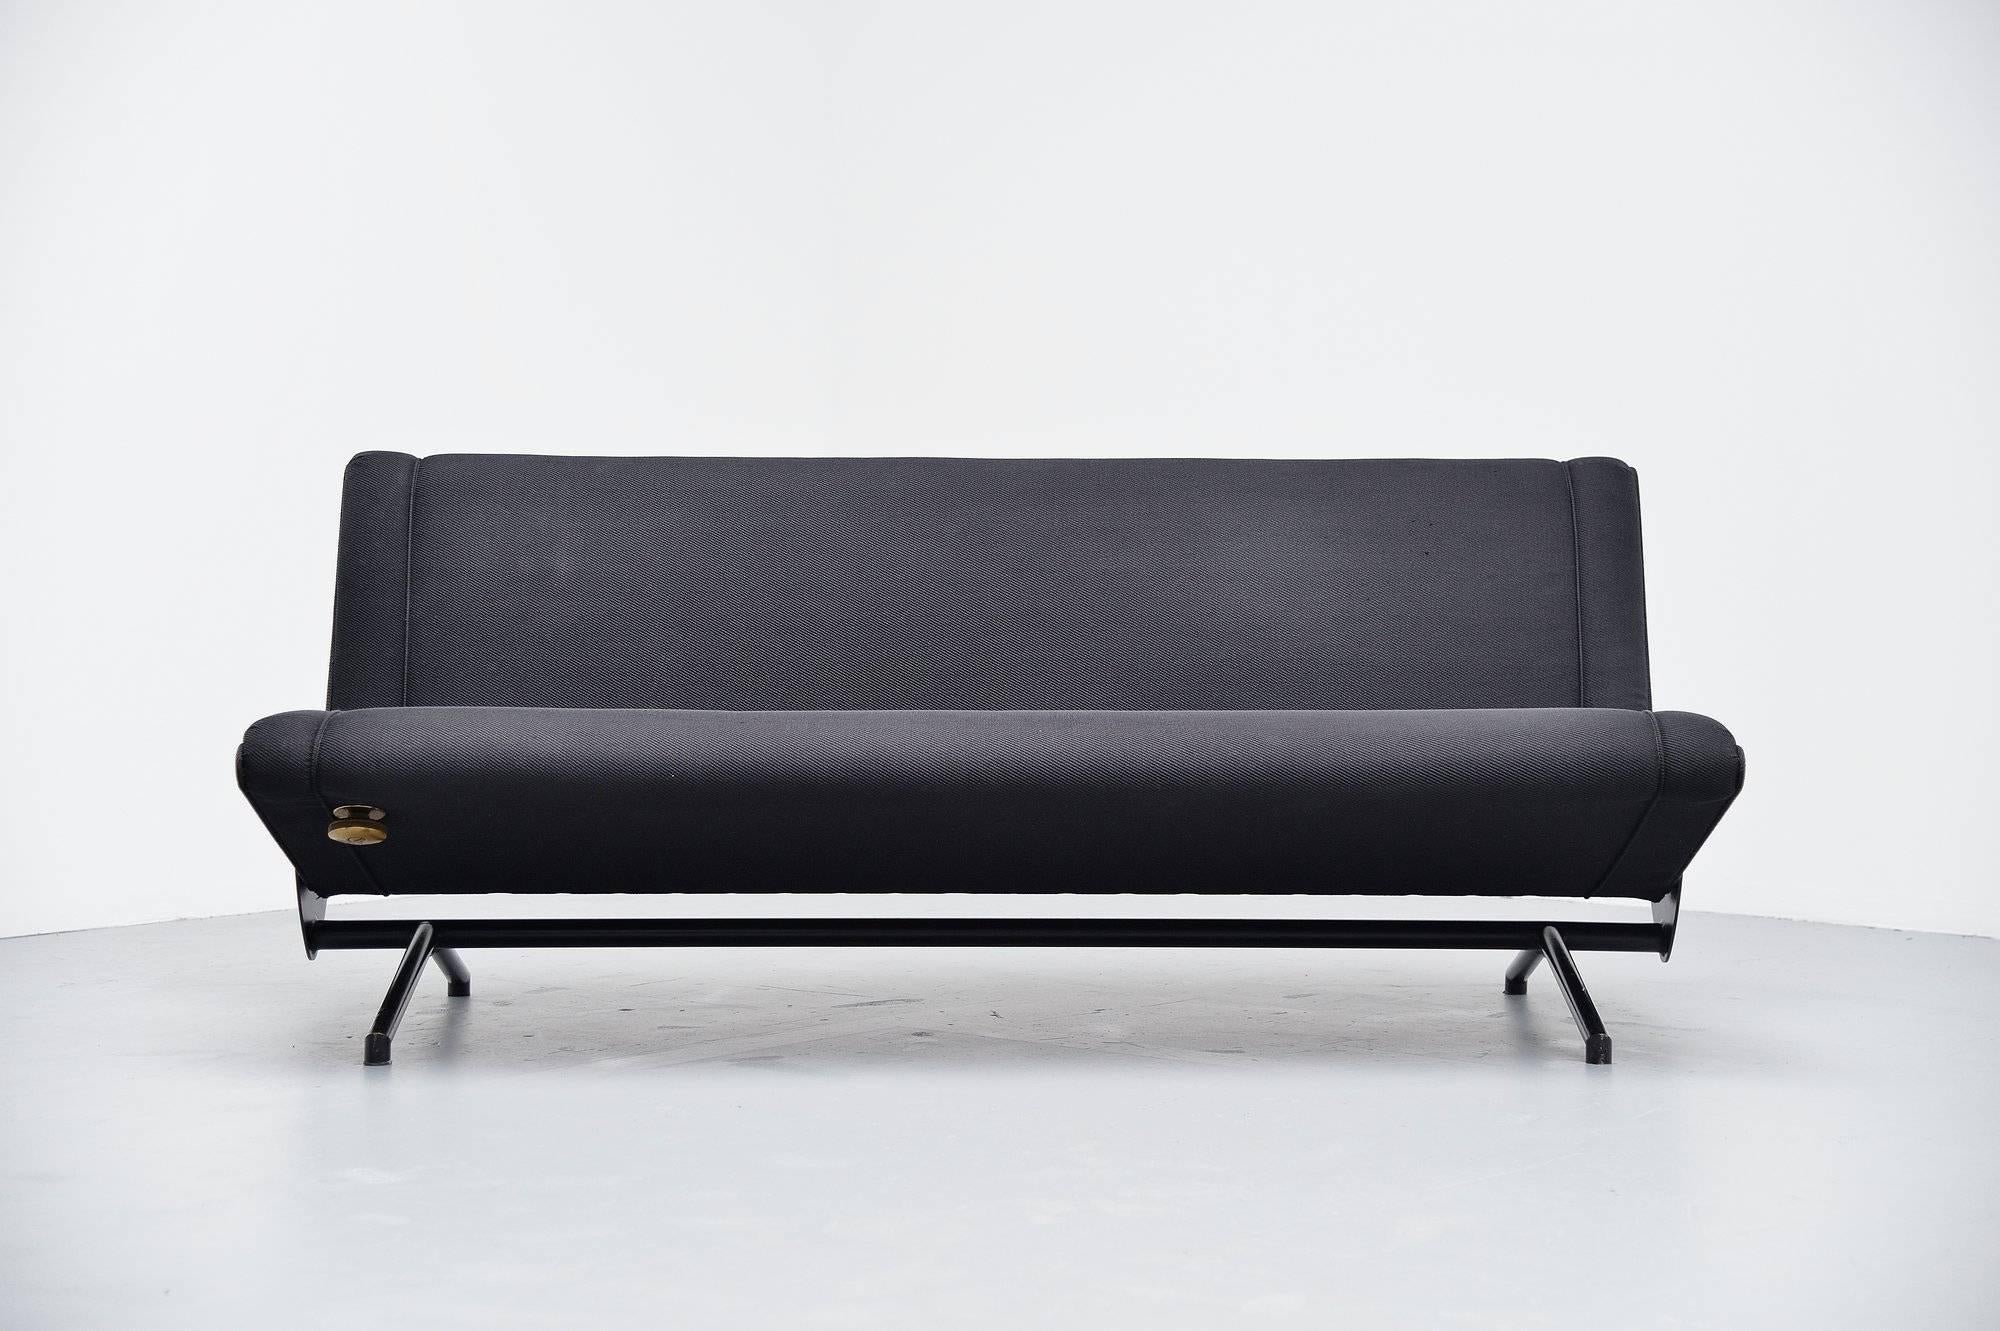 Iconic folding daybed sofa designed by Osvaldo Borsani and manufactured by Tecno, Italy, 1954. The sofa has a black lacquered tubular metal frame with brass adjusting details. It still has its original black ribbed upholstery that is in fair